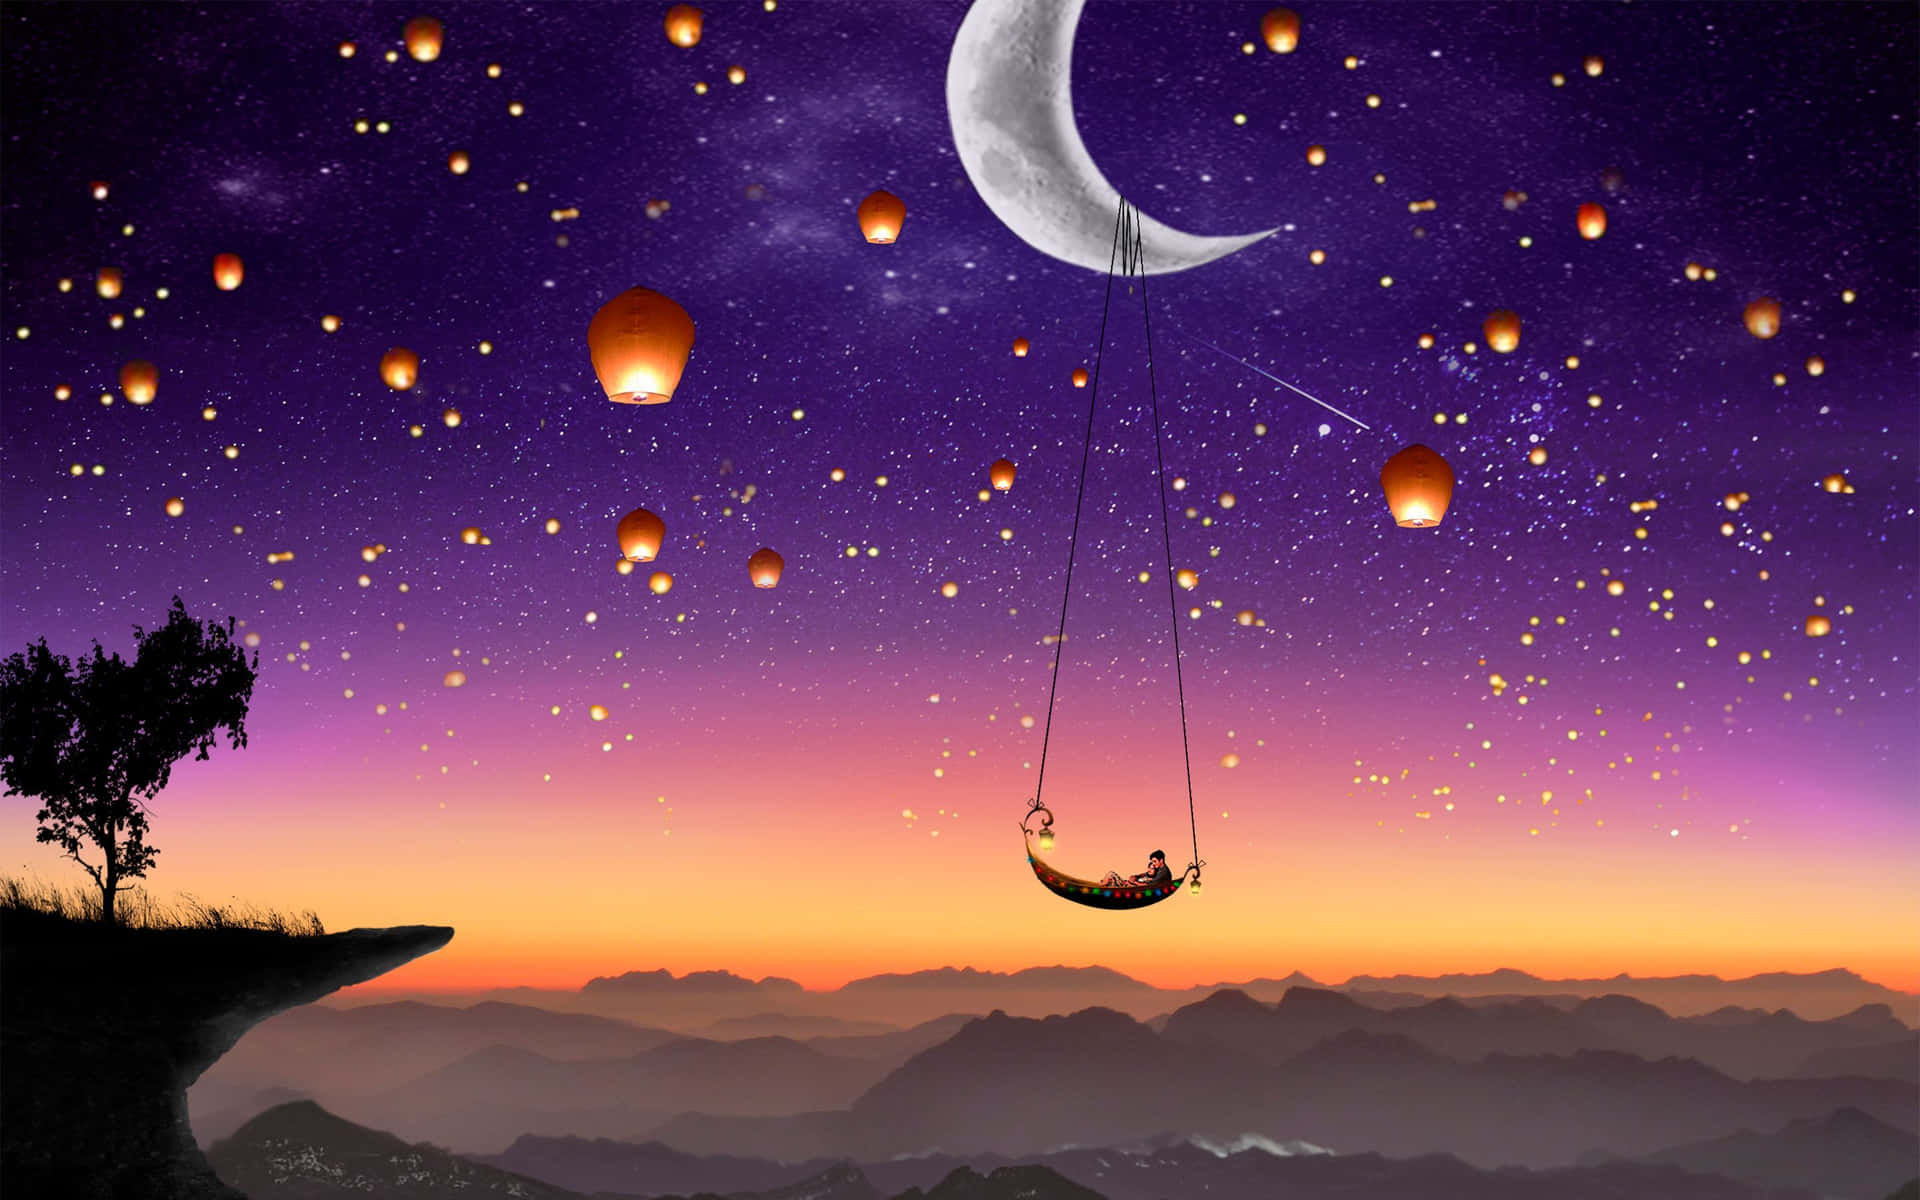 Surreal Dreamscape with Hot Air Balloons and Floating Islands